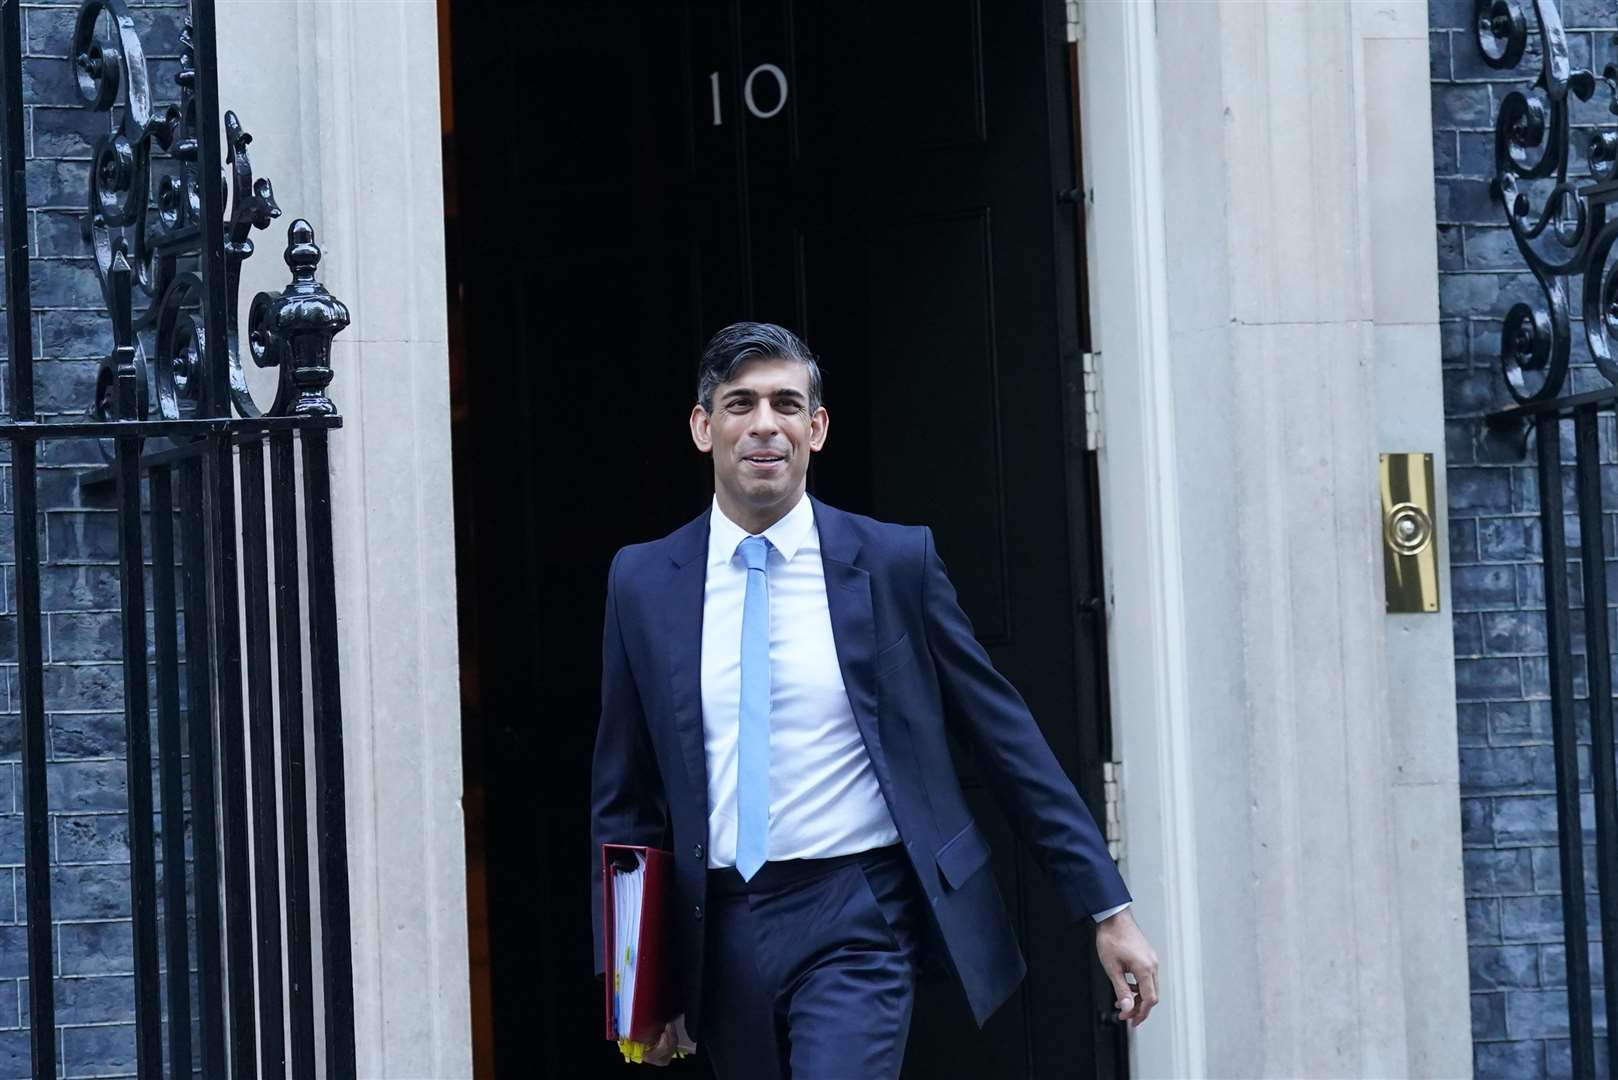 Rishi Sunak said subpostmasters caught up in the Horizon scandal were victims of ‘one of the greatest miscarriages of justice in our nation’s history’ (Stefan Rousseau/PA)